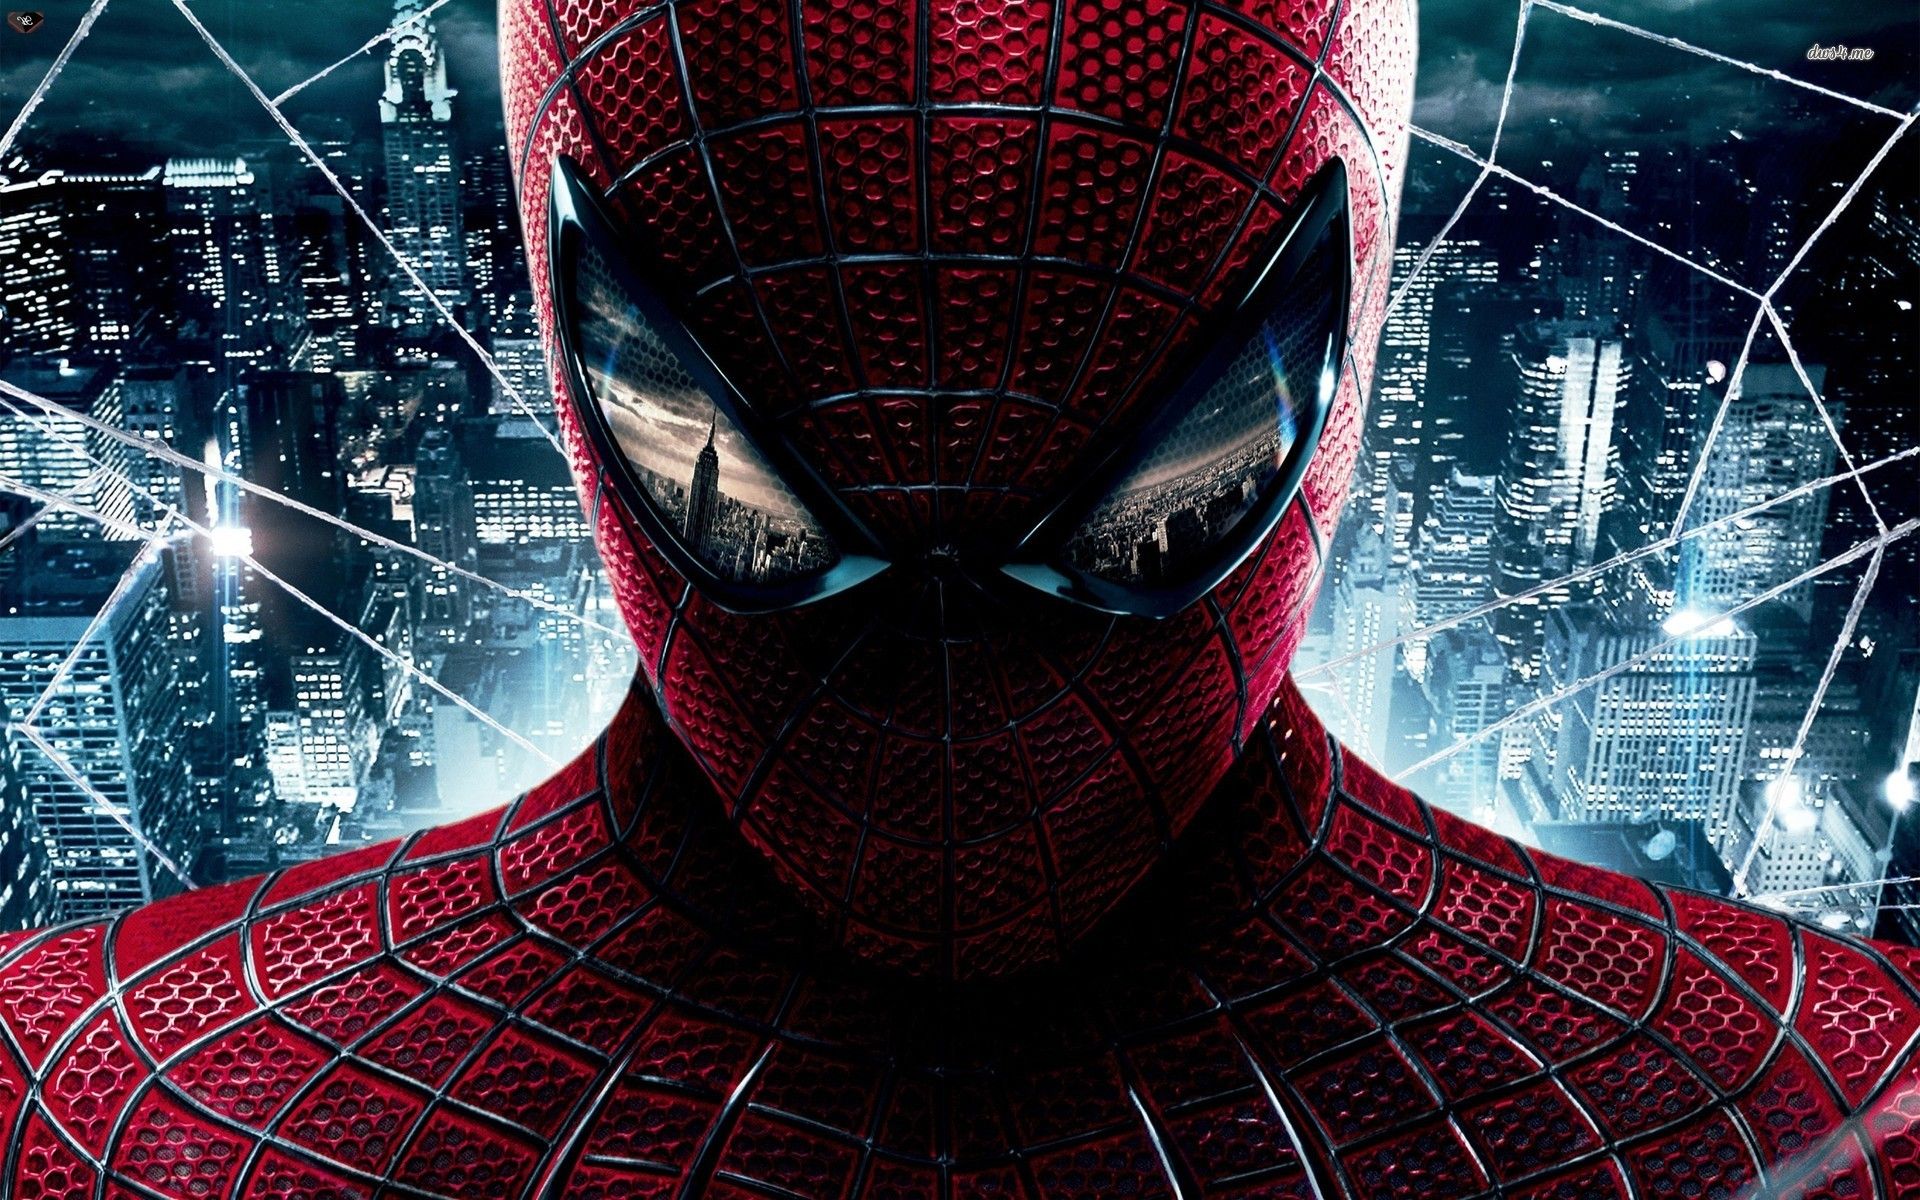 The Amazing Spider-Man wallpaper - Movie wallpapers - #15071